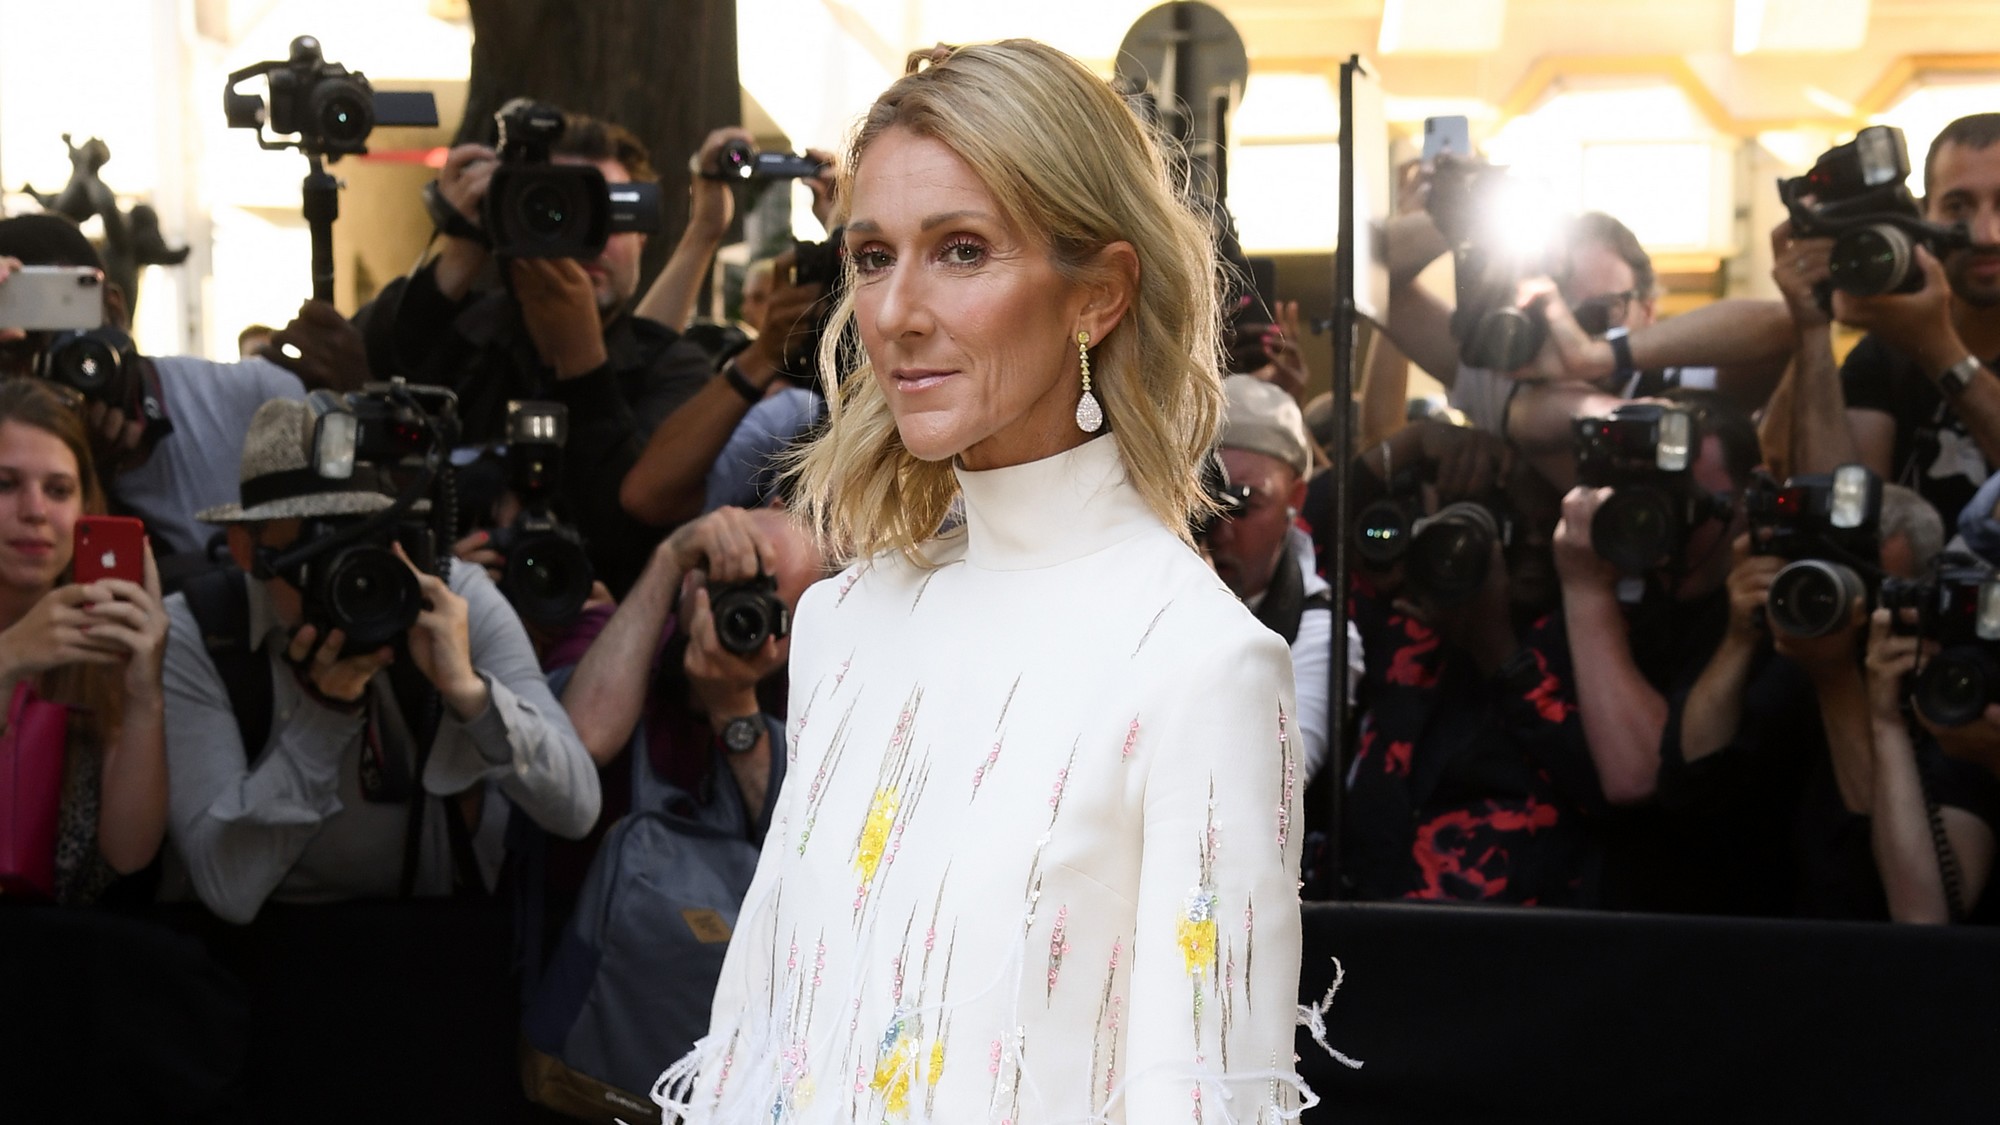 Céline Dion suffered in silence for over fifteen years before identifying the illness she has.